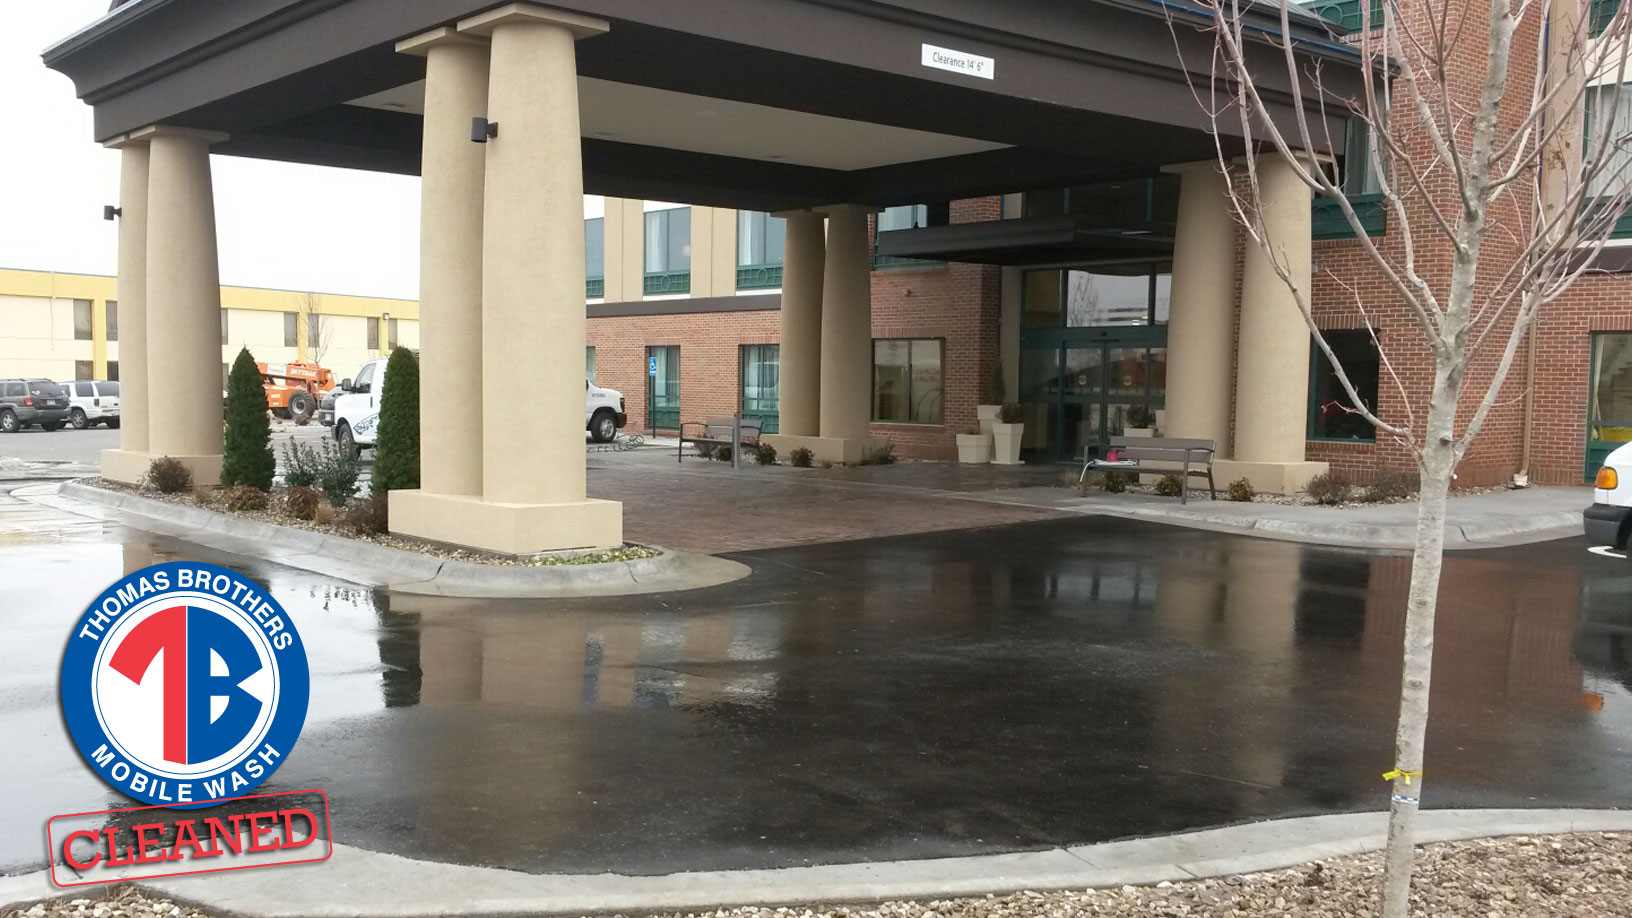 Power washed parking lot